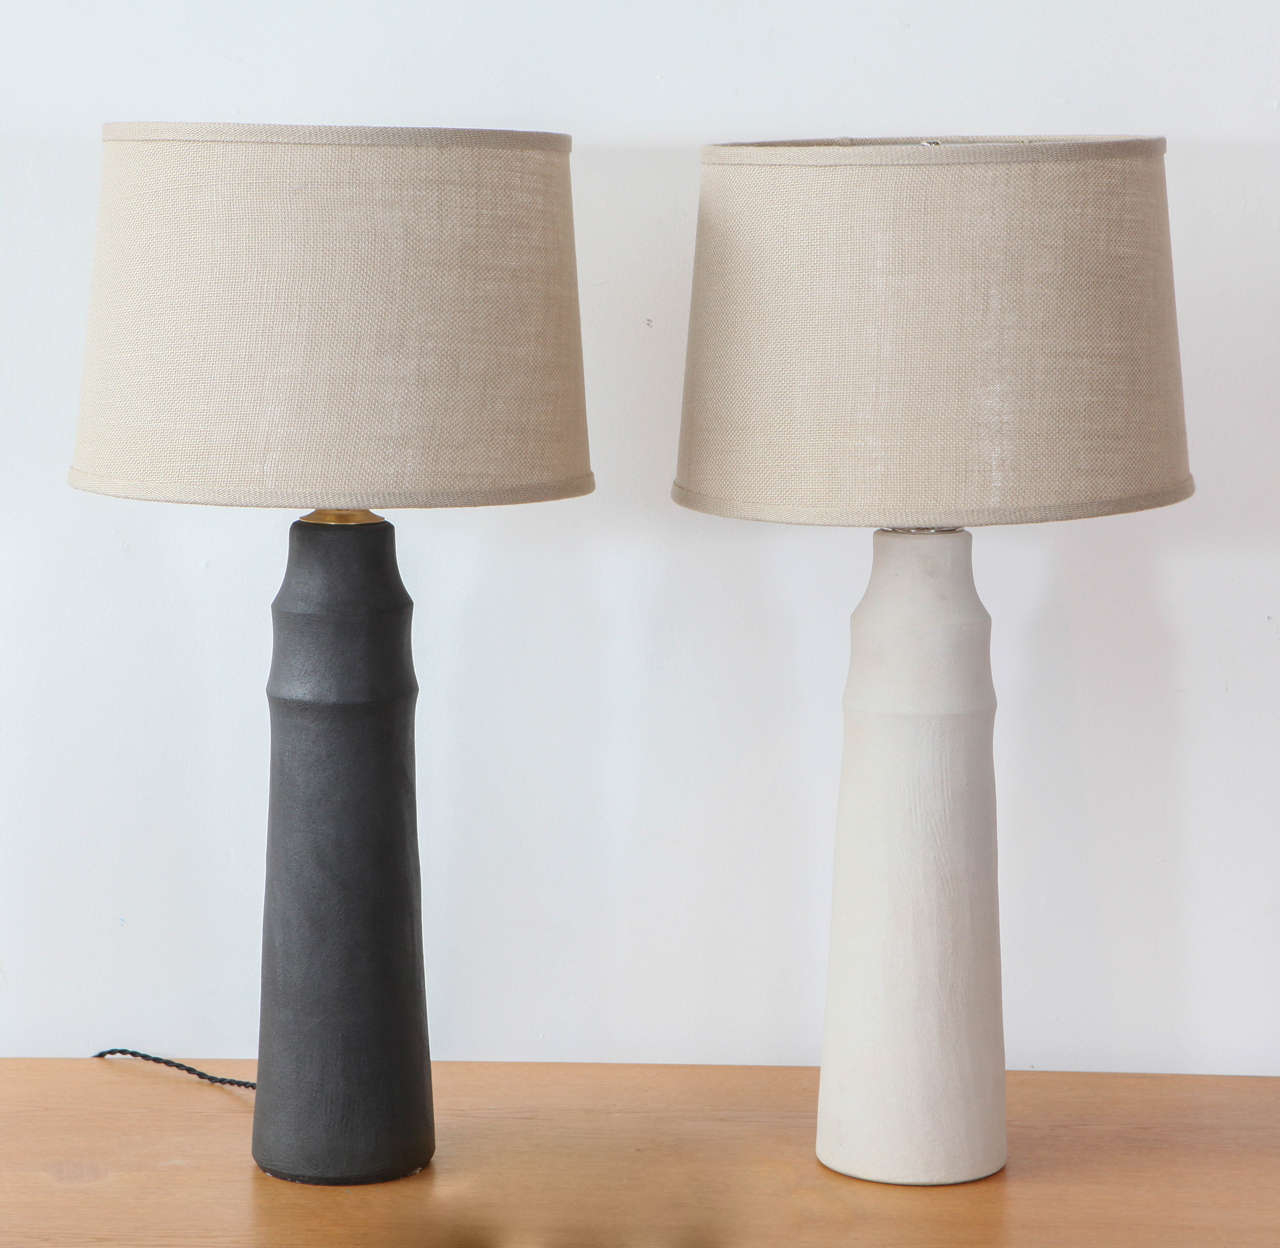 White Ceramic Table Lamps Disacode Home Design From intended for size 1280 X 1248